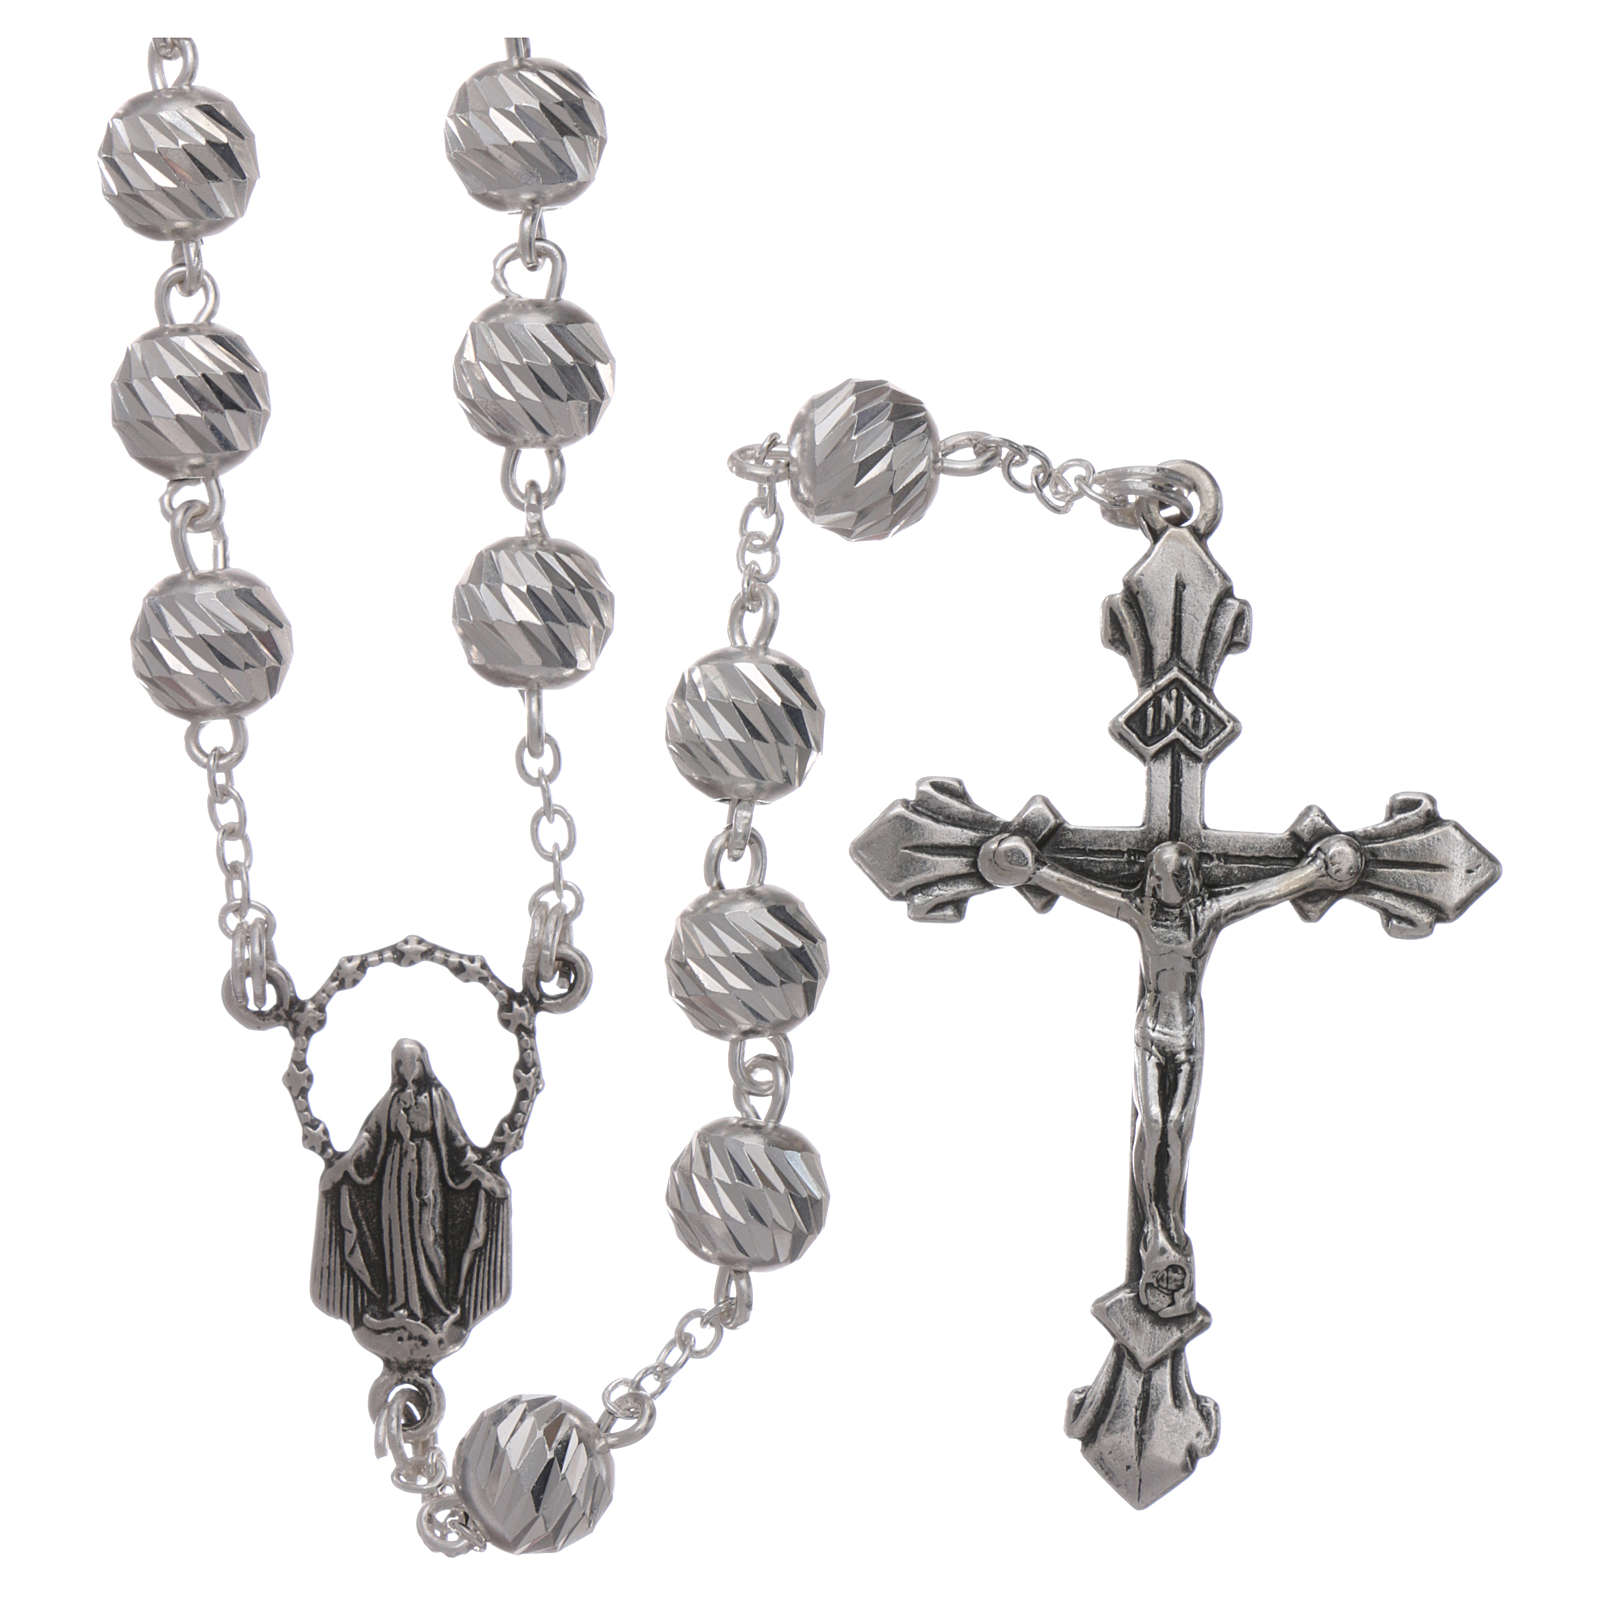 Gift Boxed Malachy O'More Center and 1 3/8 x 3/4 inch Crucifix Malachy O'More Rosary with 6mm Zircon Color Fire Polished Beads Silver Finish St St 